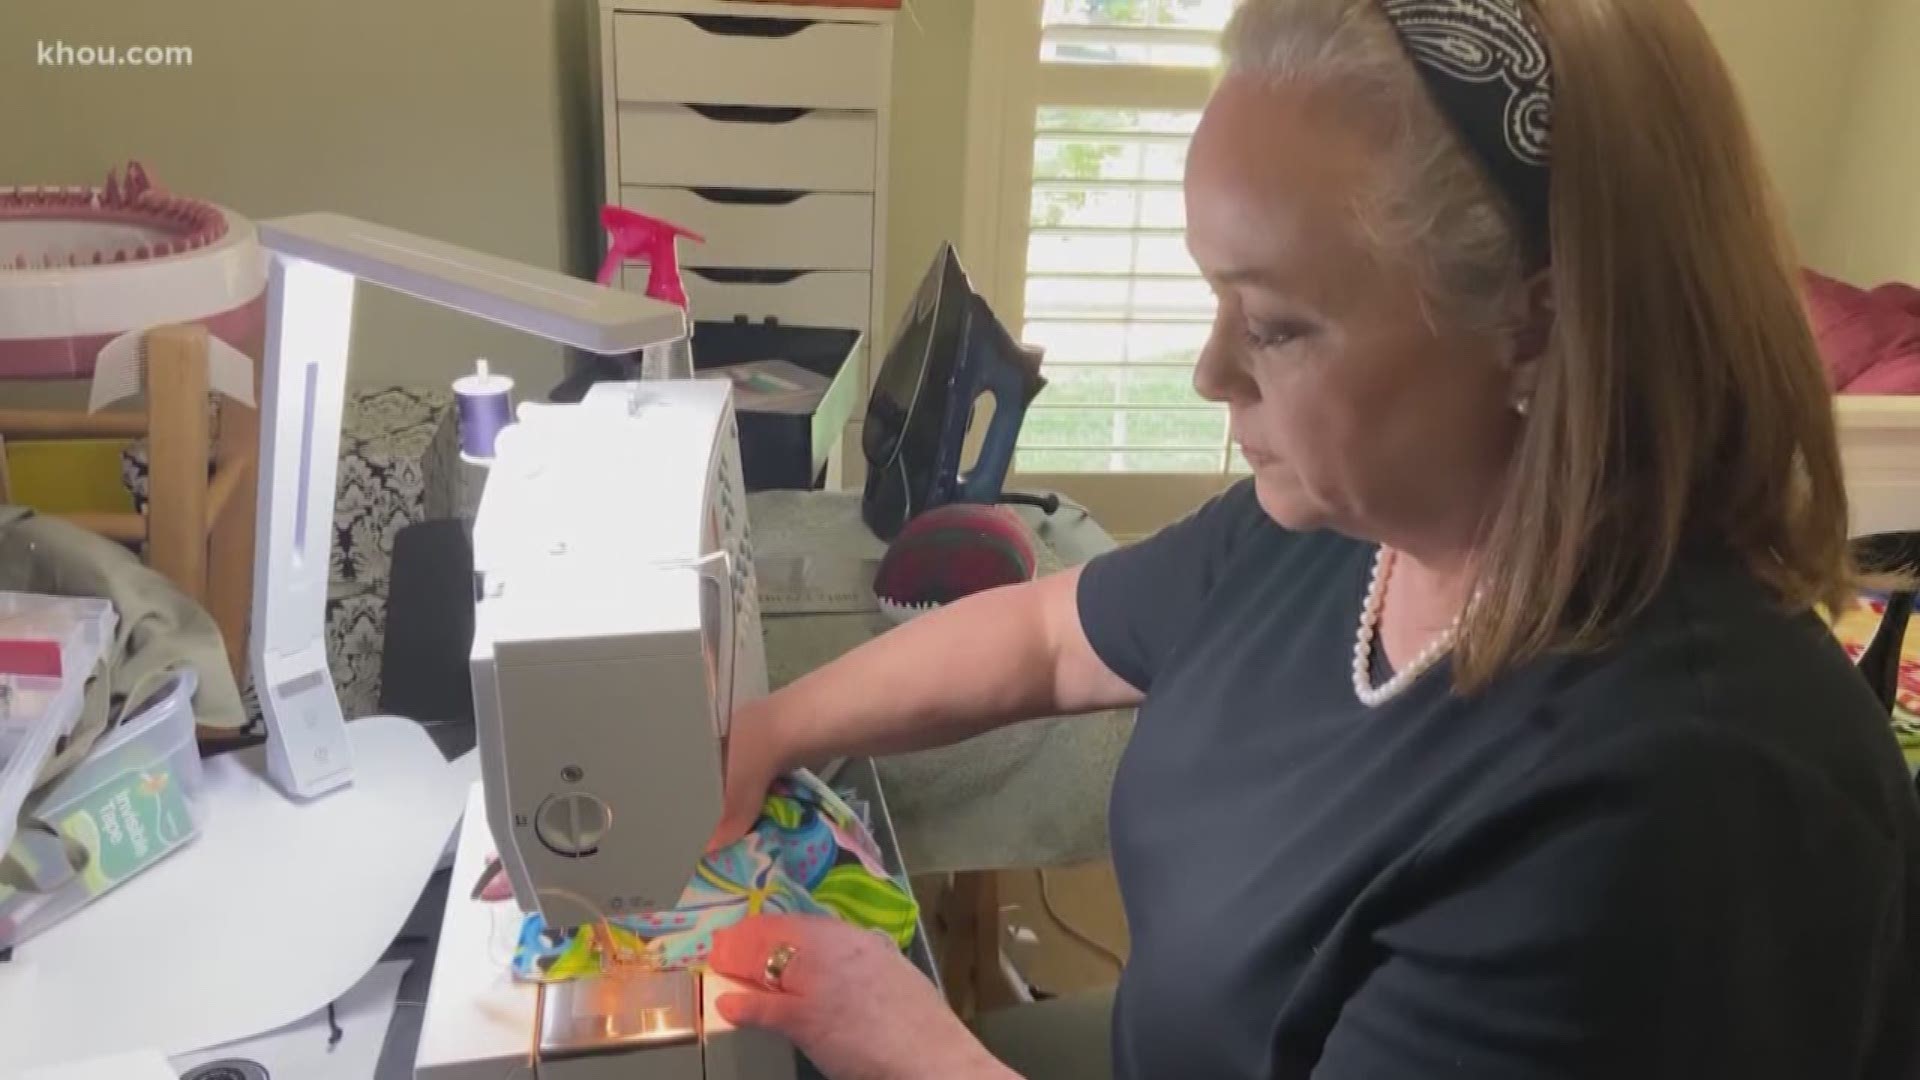 KHOU 11 News Matt Dougherty tells us about a woman in The Woodlands who is sewing protective masks for United States postal workers.